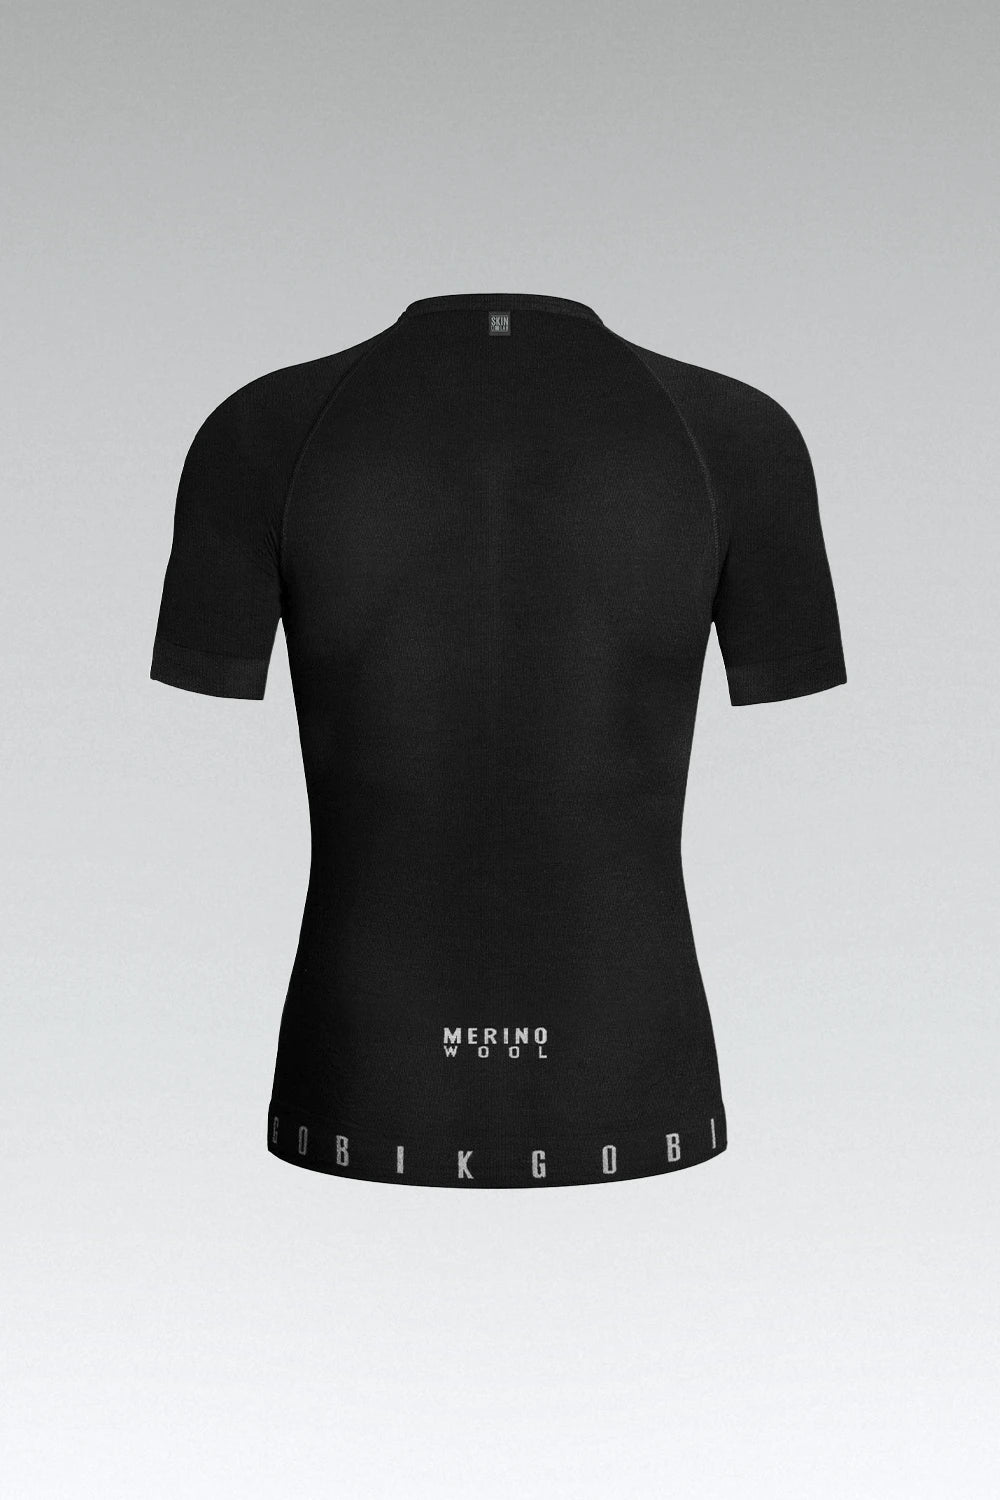 SOUS MAILLOT MANCHES COURTES WINTER MERINO HOMME